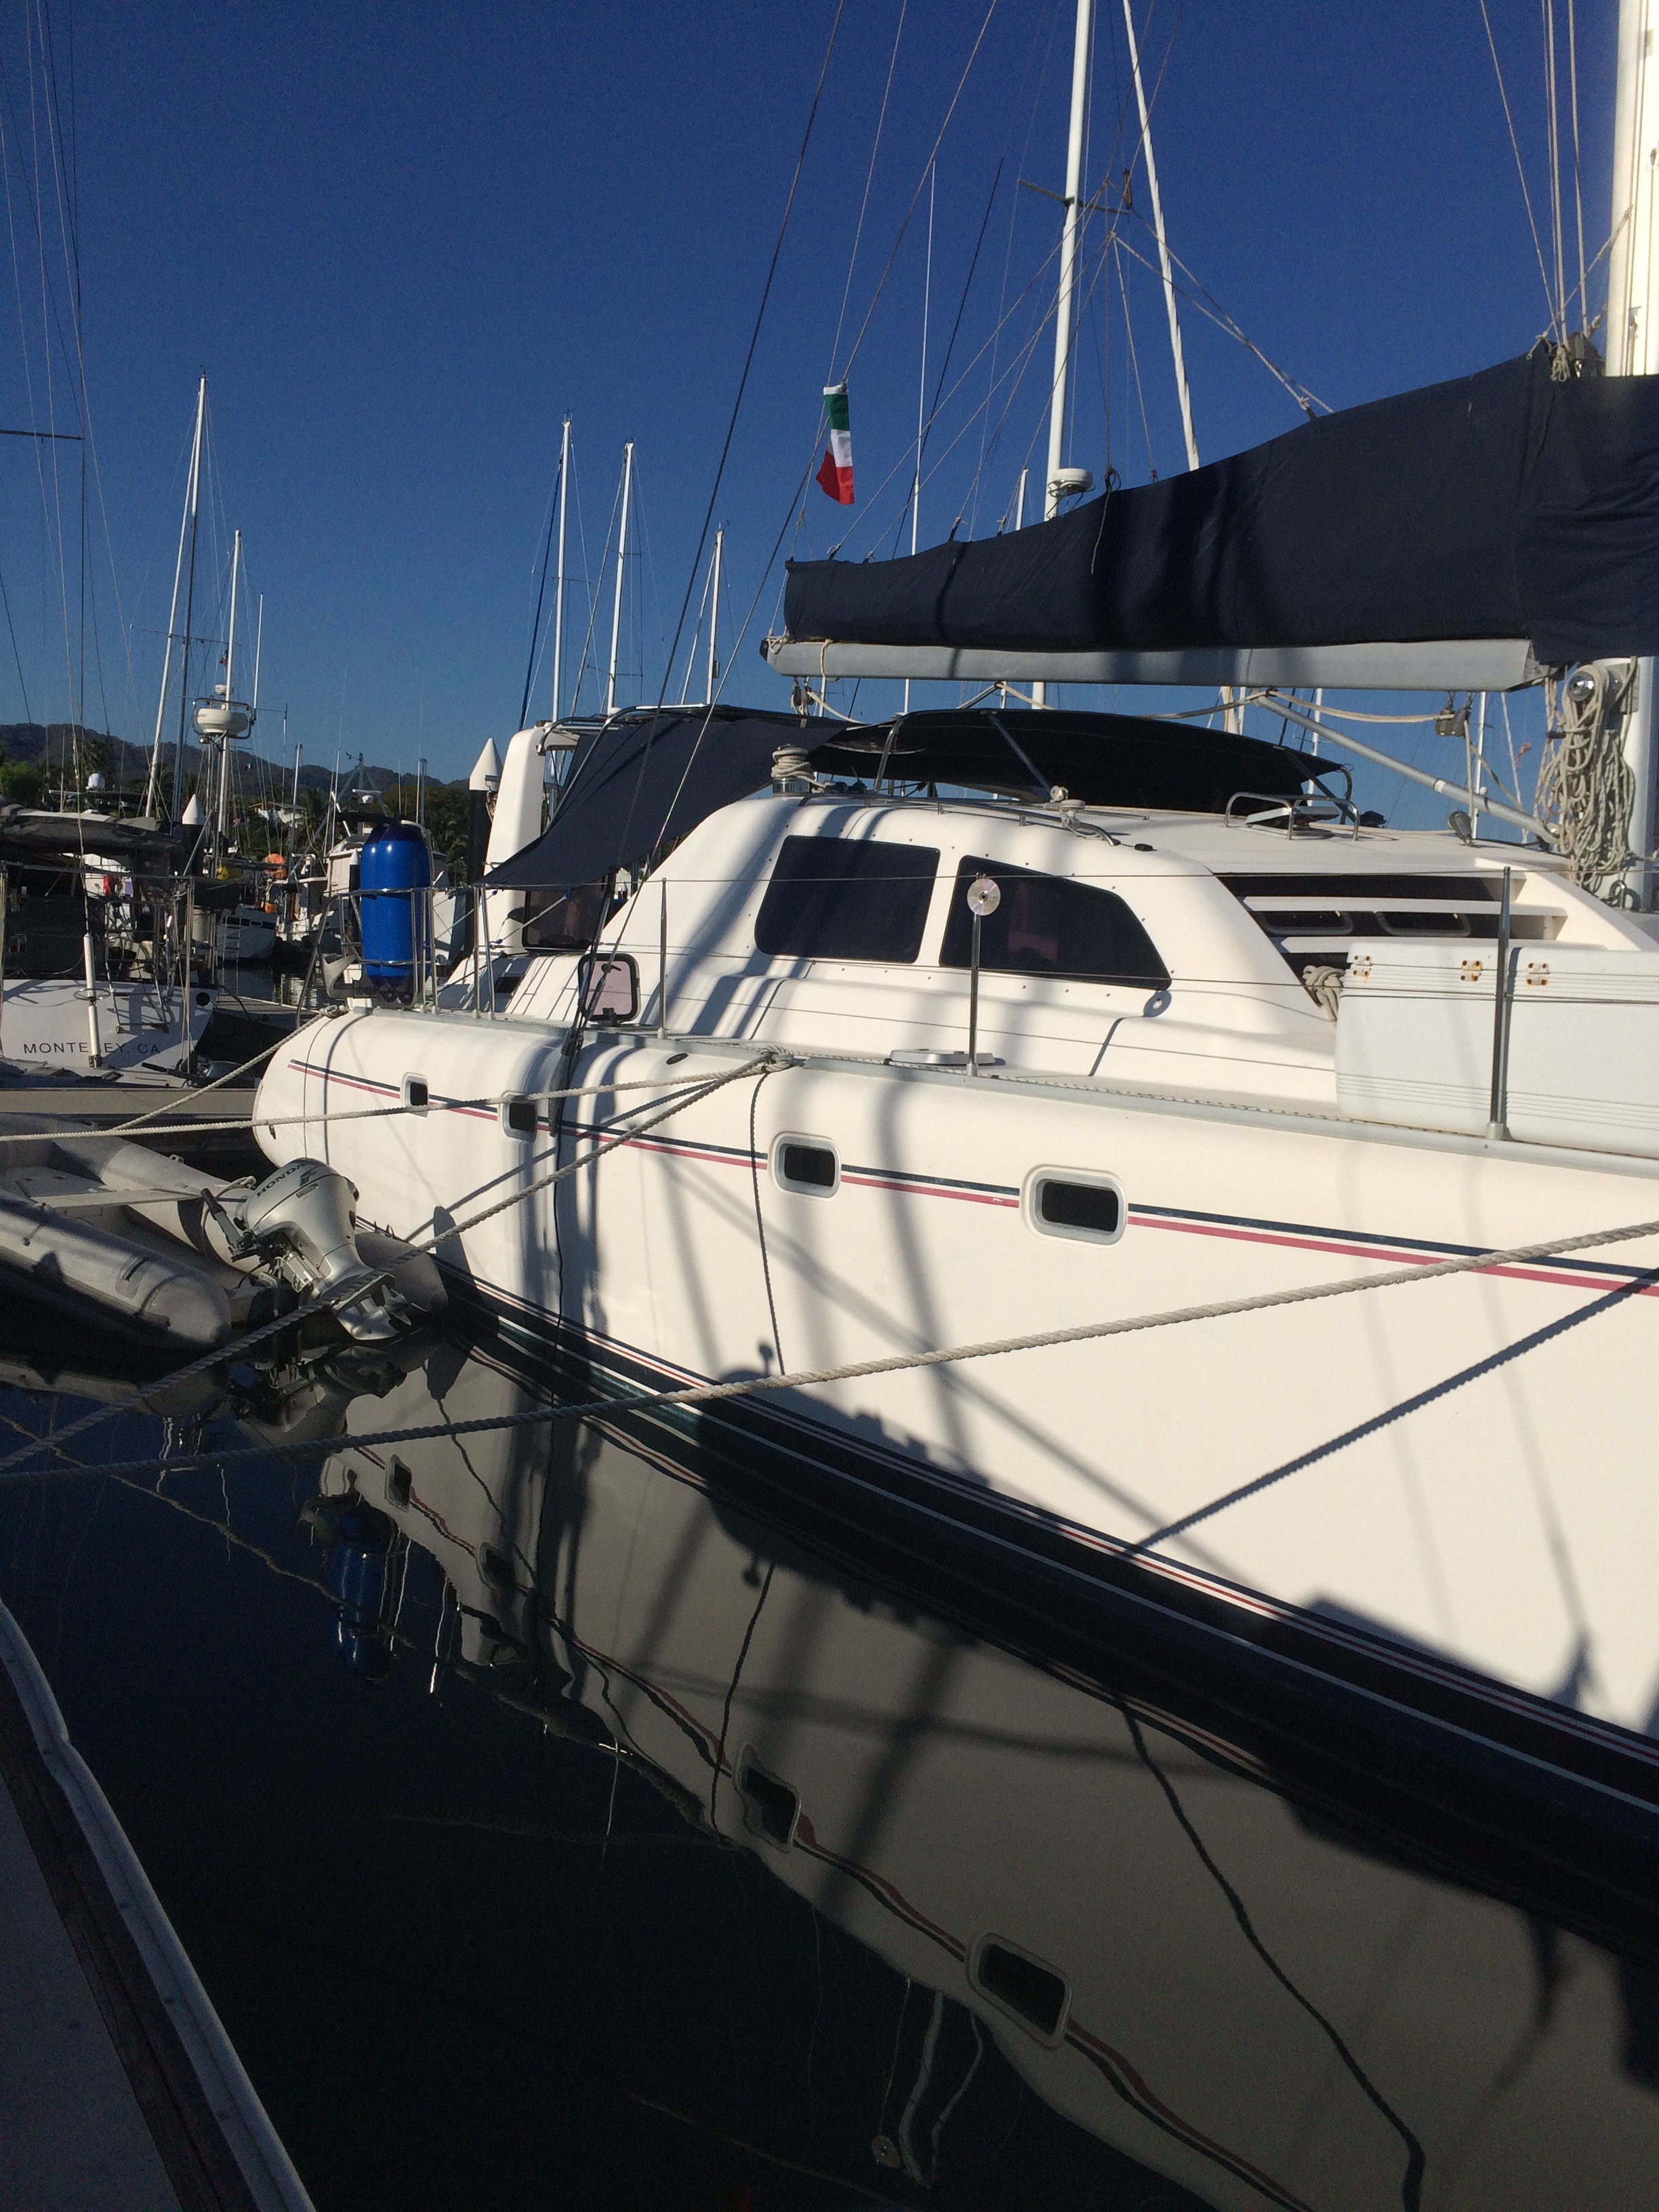 Used Sail Catamaran for Sale 1997 Leopard 45 Boat Highlights